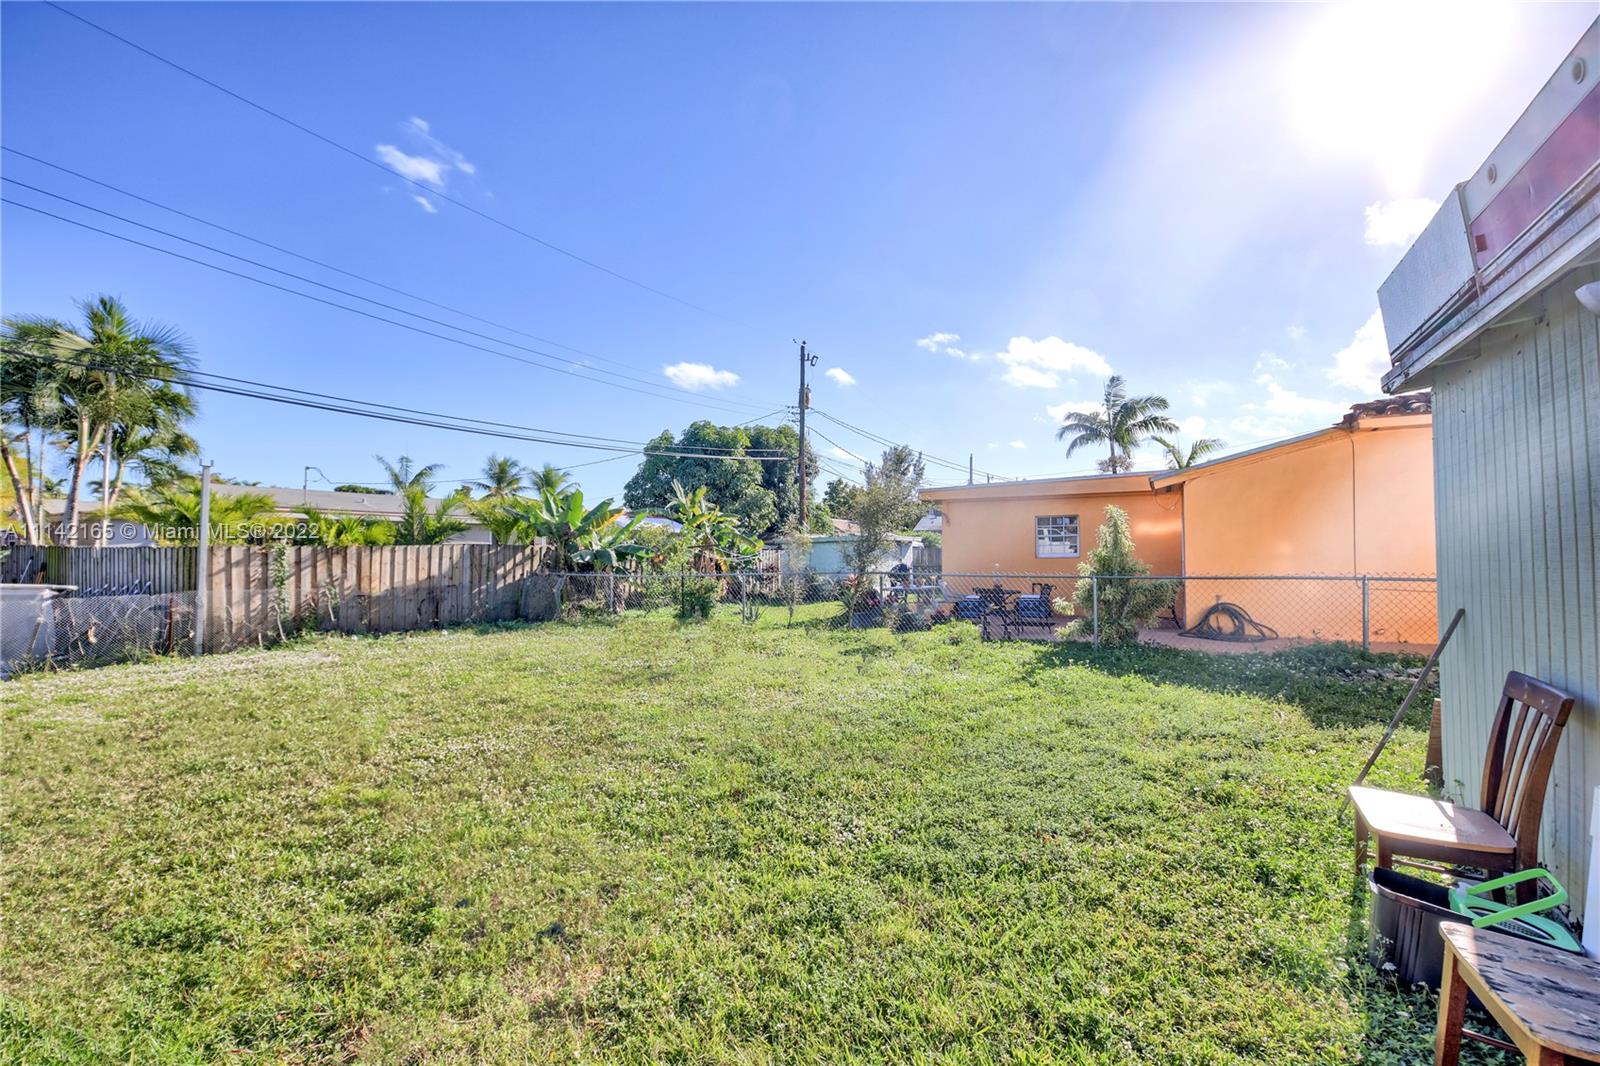 405 TAMIAMI CANAL RD